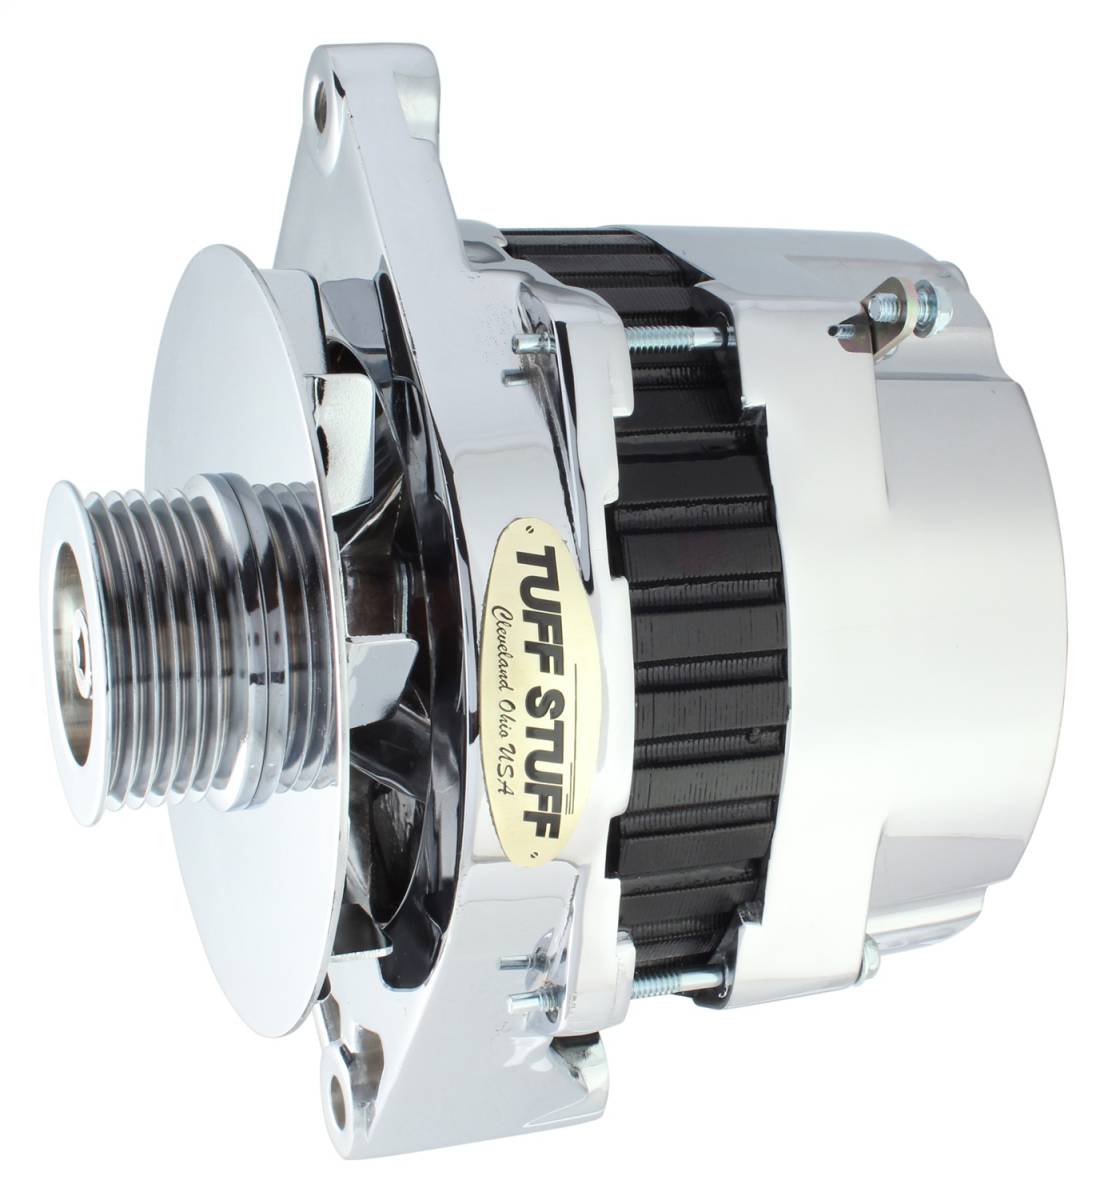 Tuff Stuff Performance - Alternator 250 High AMP Incl. Pigtail/OEM Wiring 6 Groove Pulley Aluminum Polished 7290NEP6G